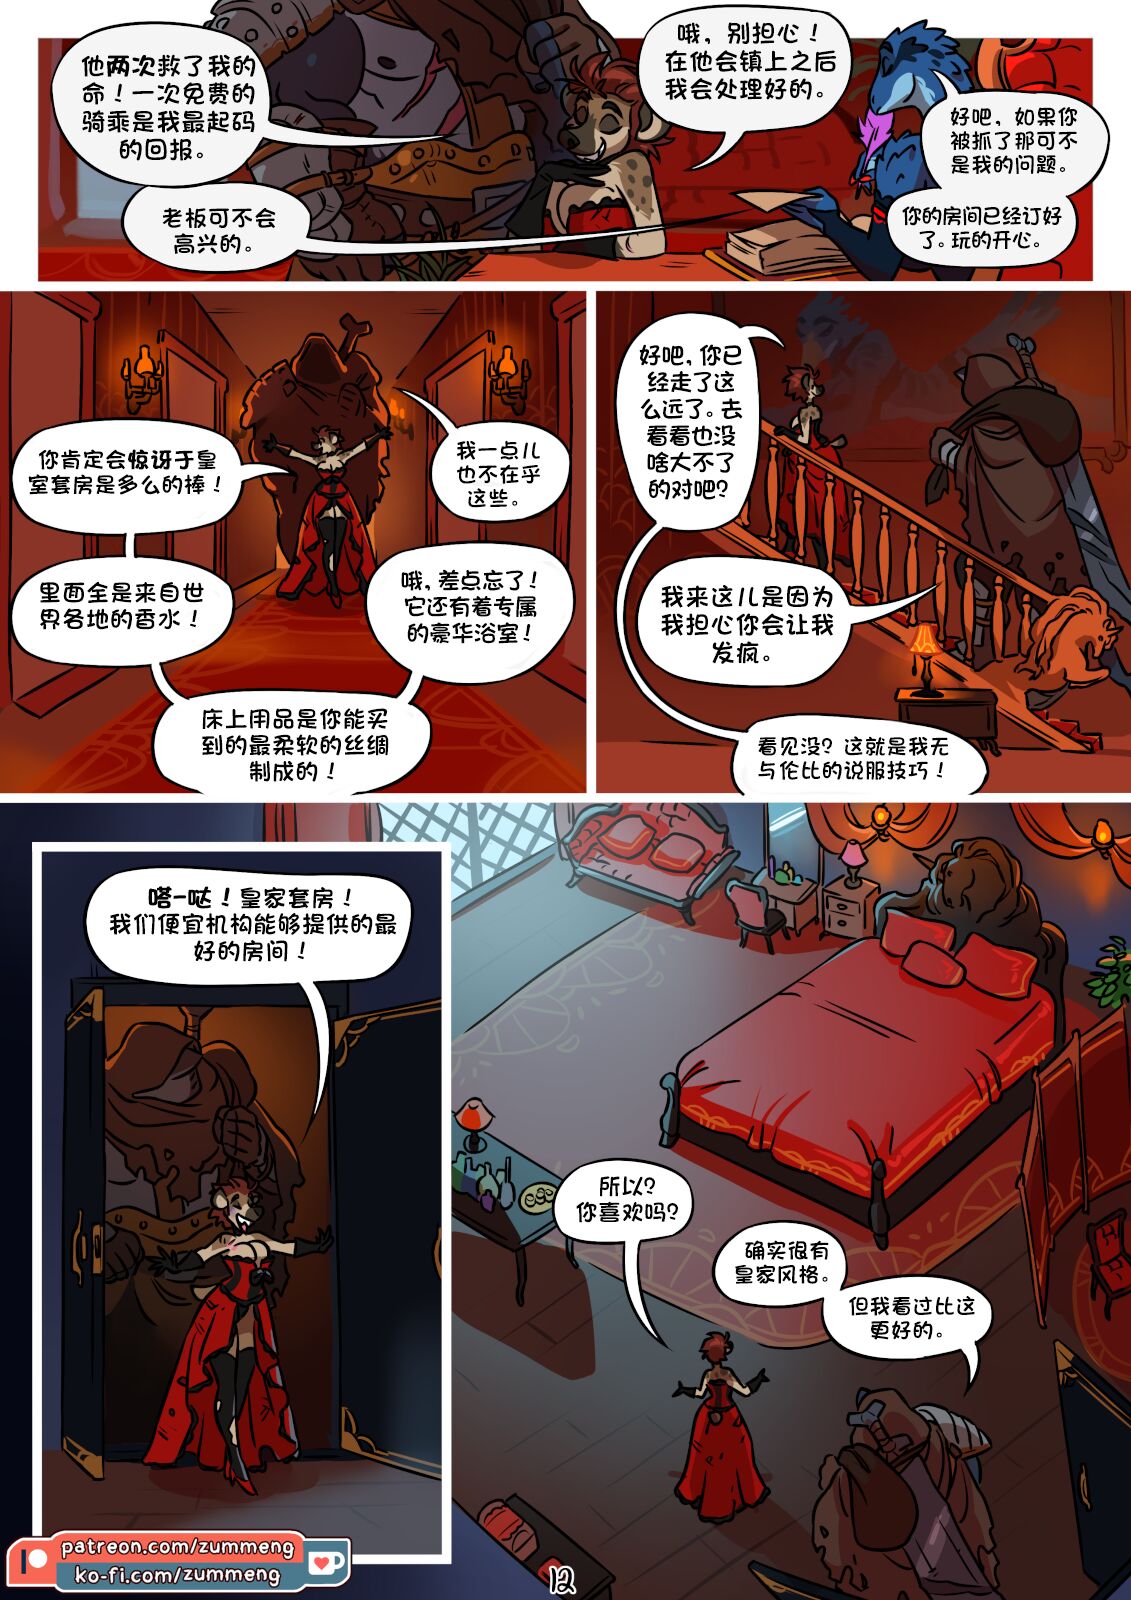 [Zummeng] Perfect Fit (ongoing) [chinese] [lostecho个人汉化] 